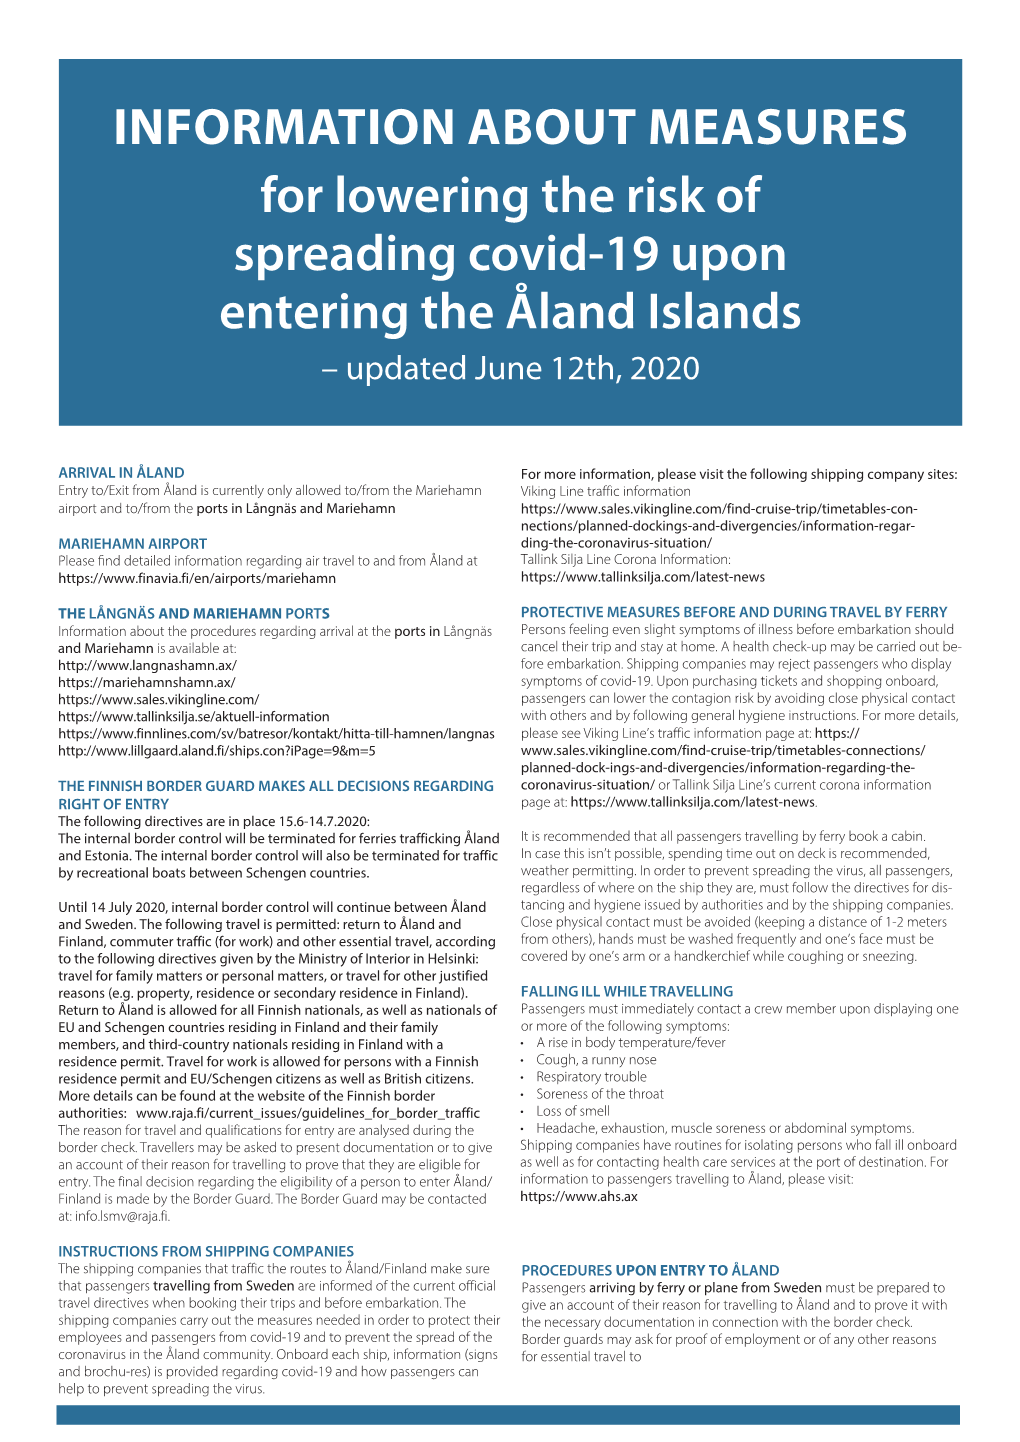 INFORMATION ABOUT MEASURES for Lowering the Risk of Spreading Covid-19 Upon Entering the Åland Islands – Updated June 12Th, 2020